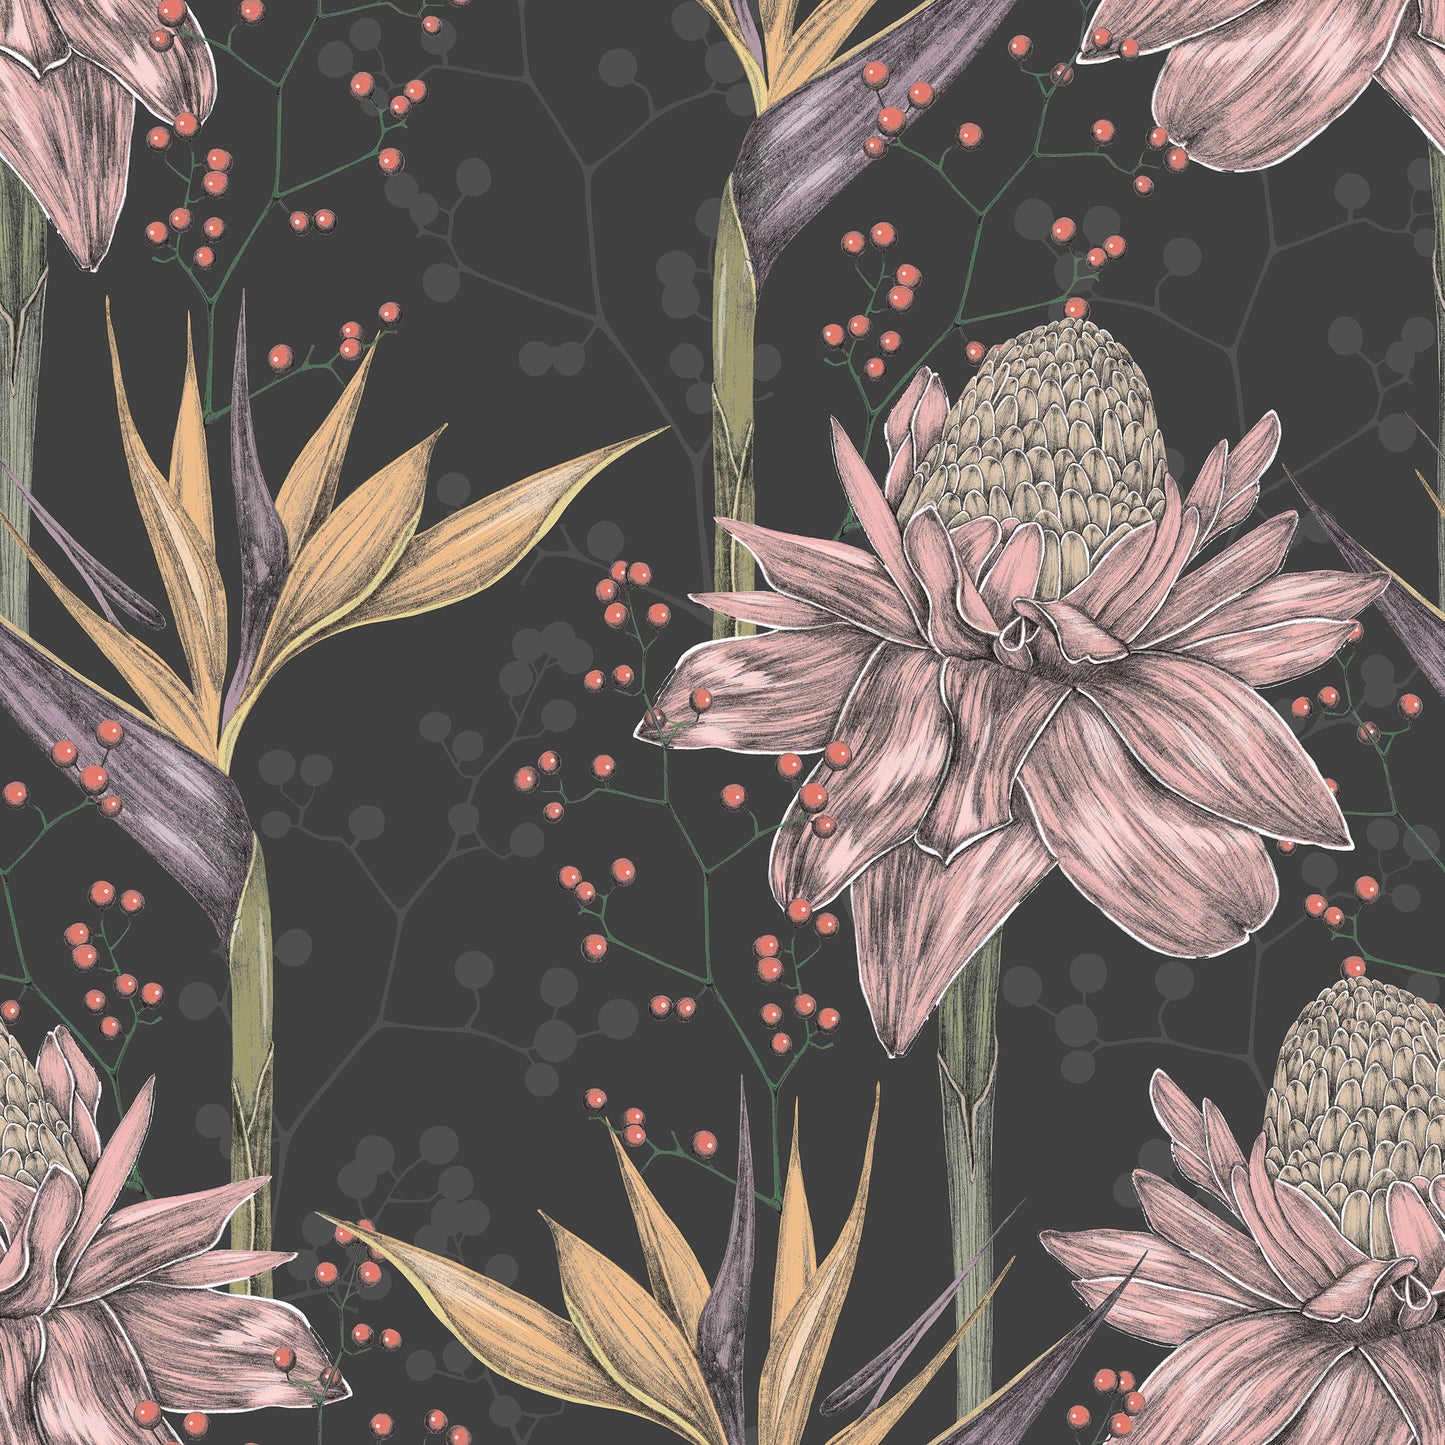 Foral paradise rose/pink and green floral print with yellow, brown and green birds of paradise flowers on black background easy to install and remove peel and stick custom wallpaper available in different lengths/sizes locally created and printed in Canada. Removable, washable, durable, commercial grade, customizable and water proof.